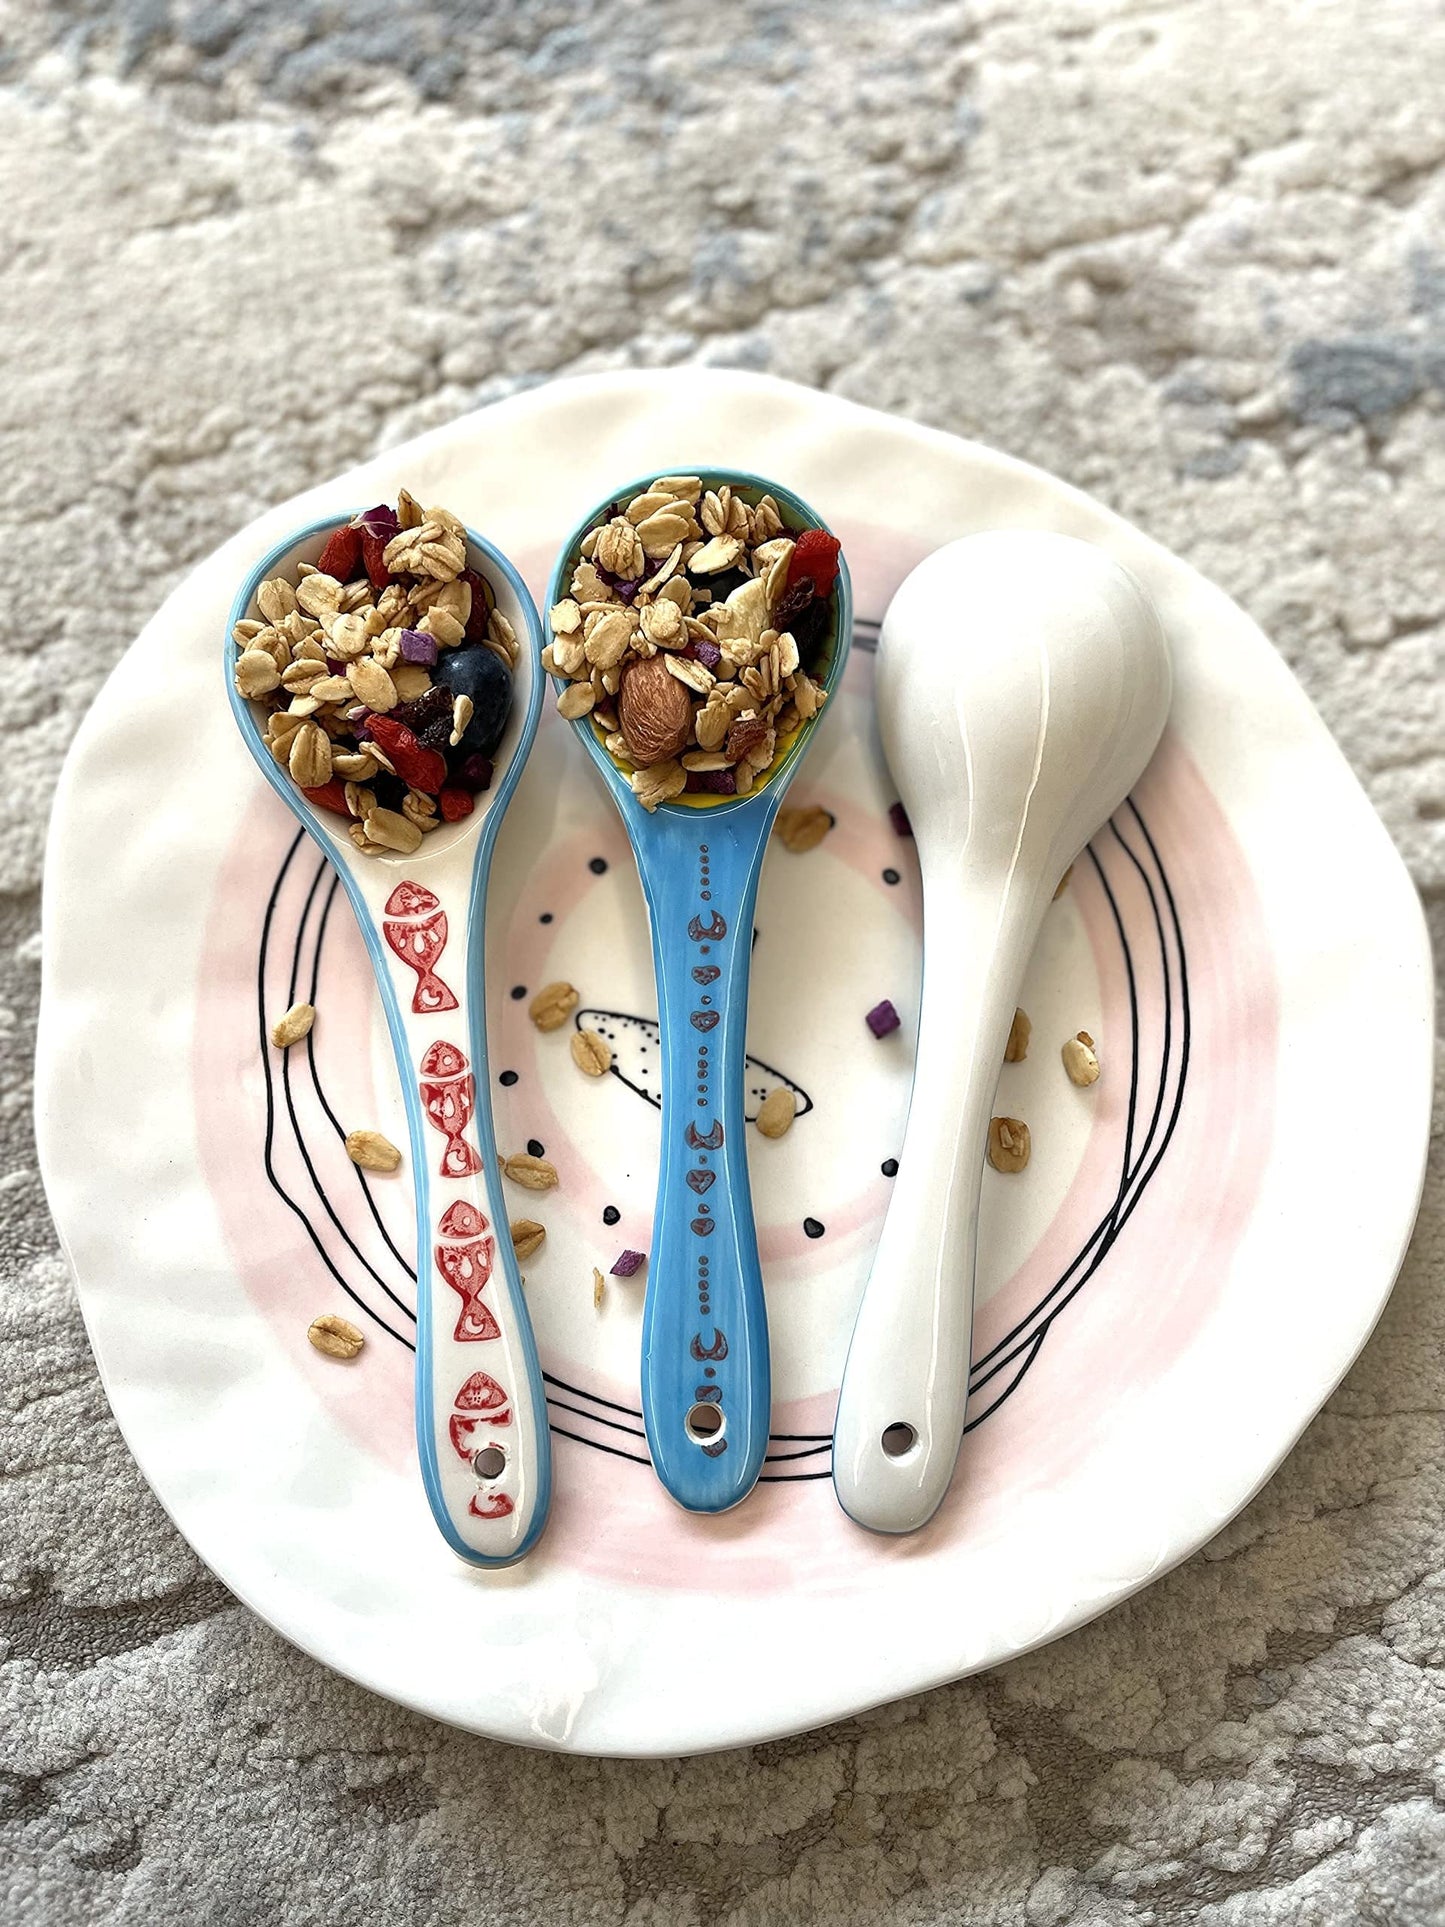 heart & home Ceramic Spoons Set of 6, Soup Spoons, Ceramic Spoons for Soup, 6-1/2" L, Multicolor